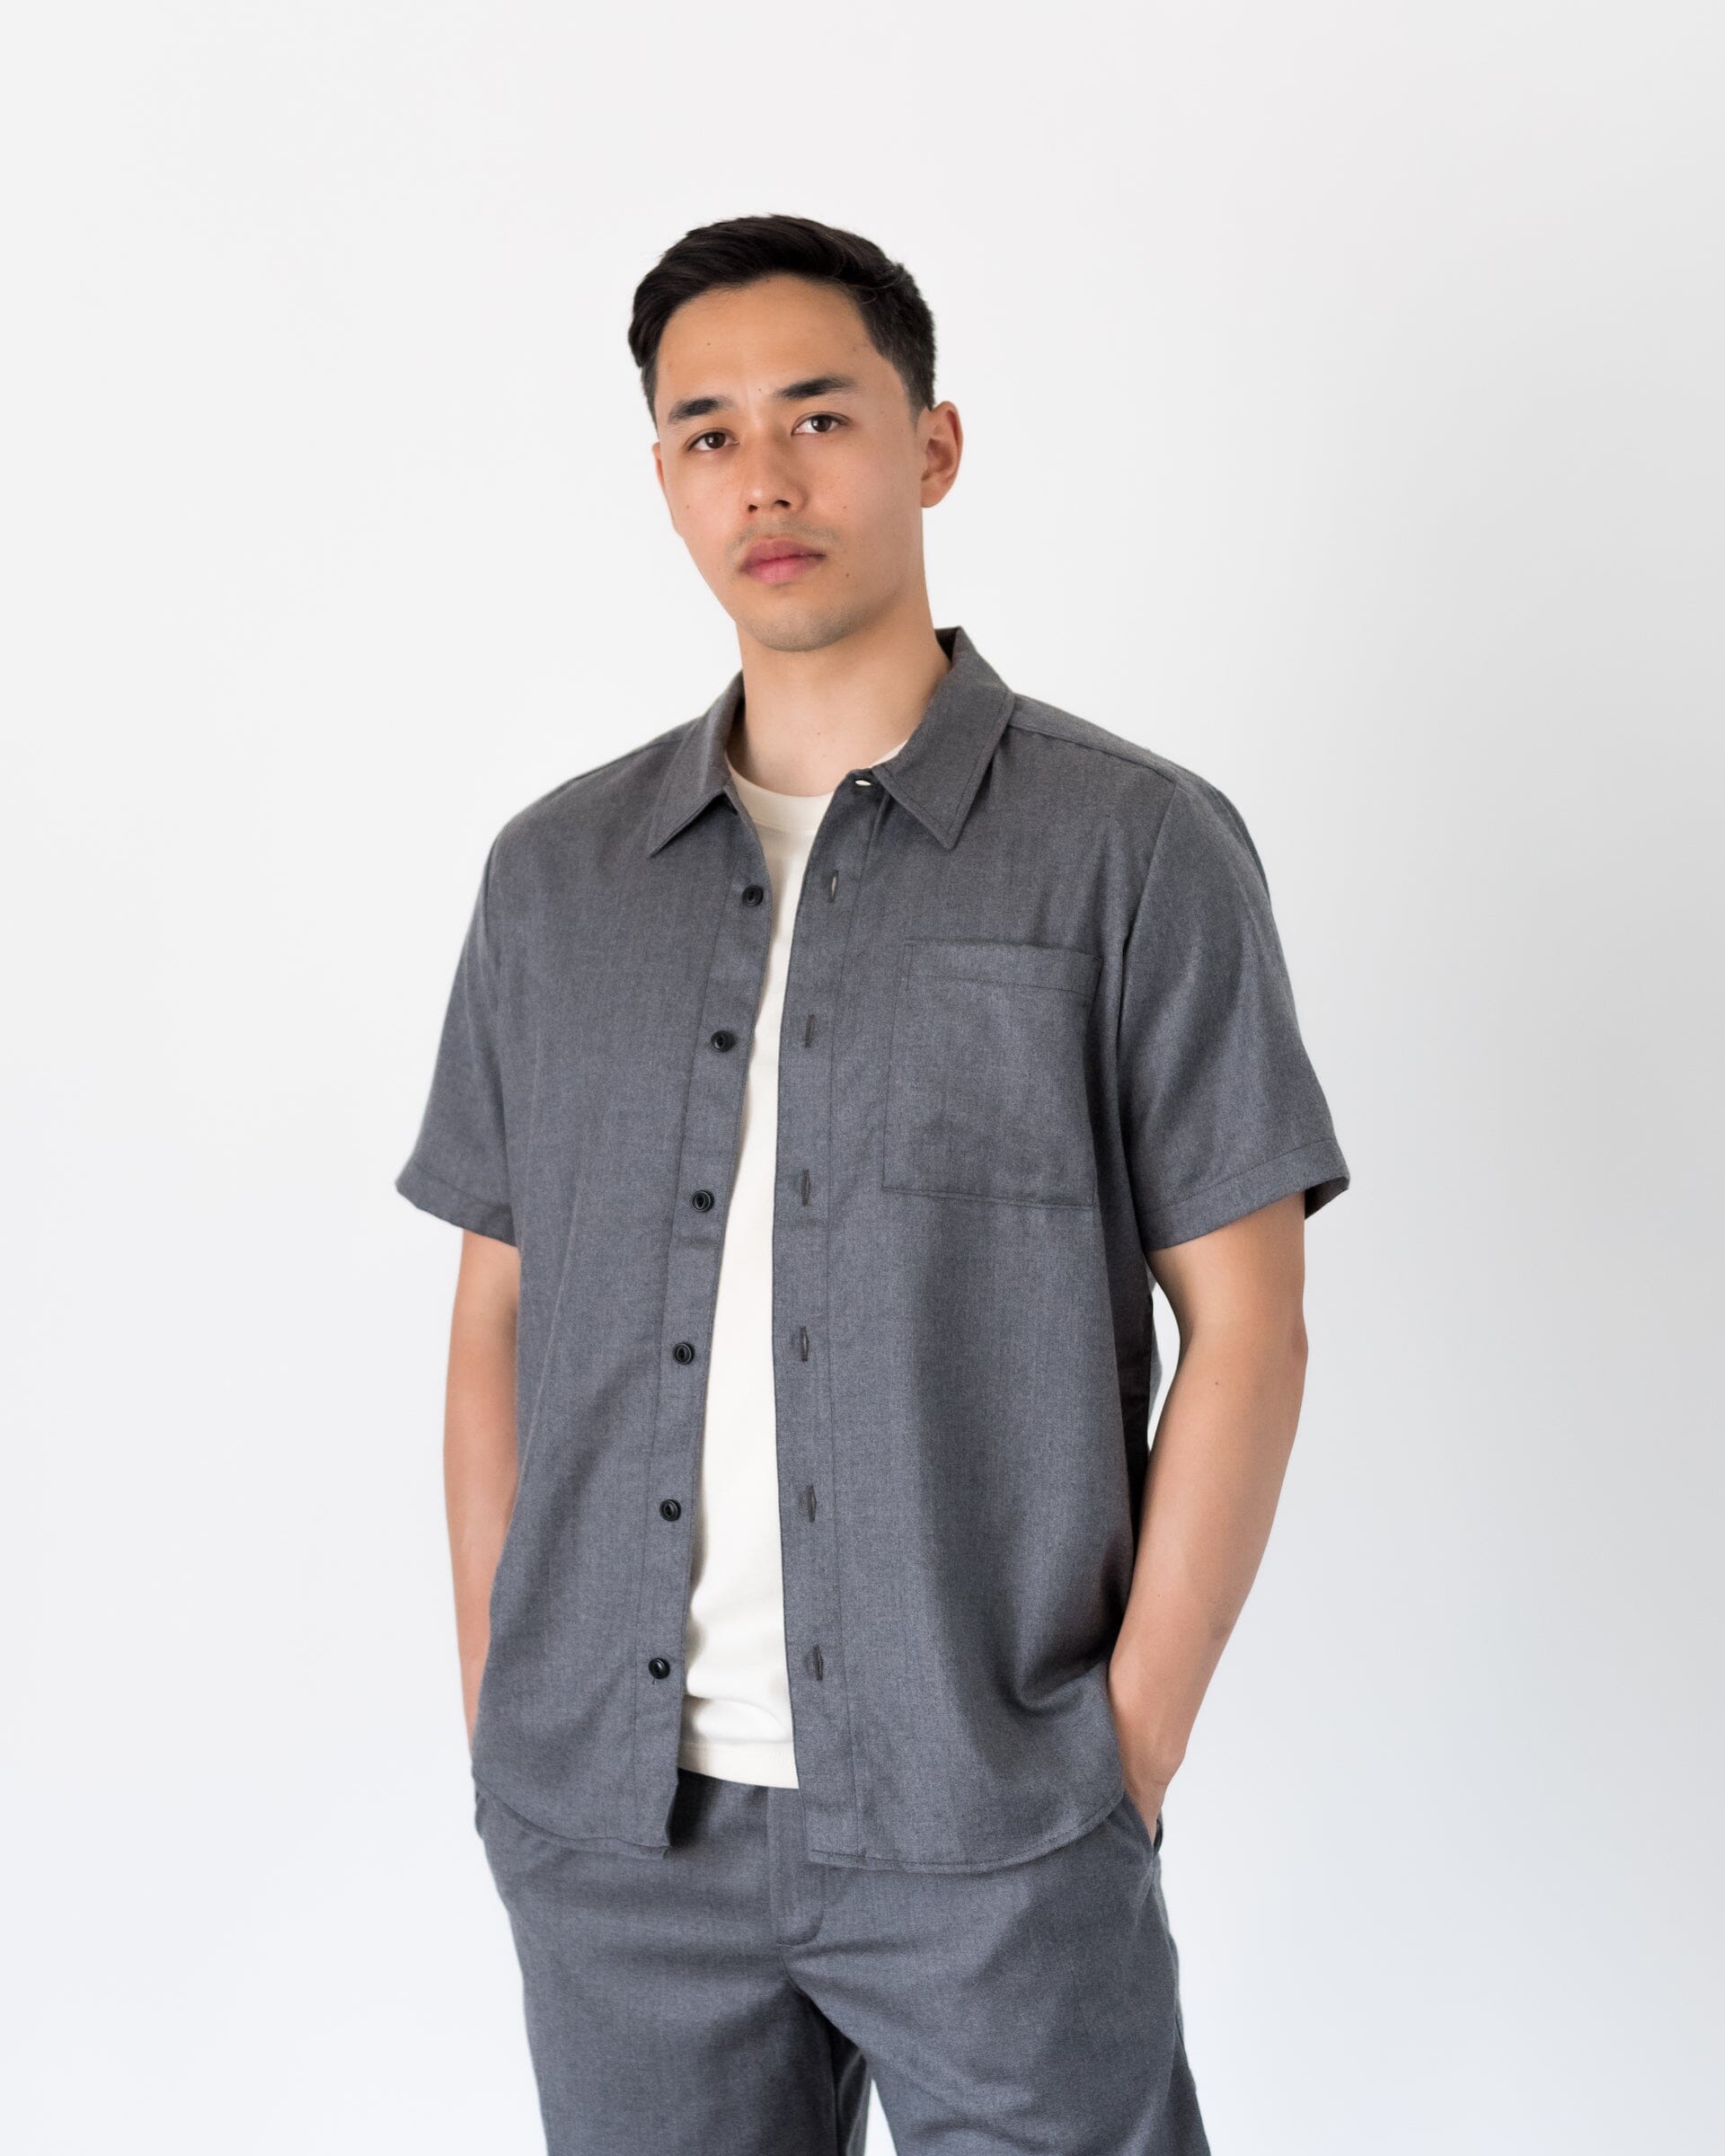 The Light Wool Short Sleeve Shirt in Heather Grey - Full Body 2 #color_heather grey